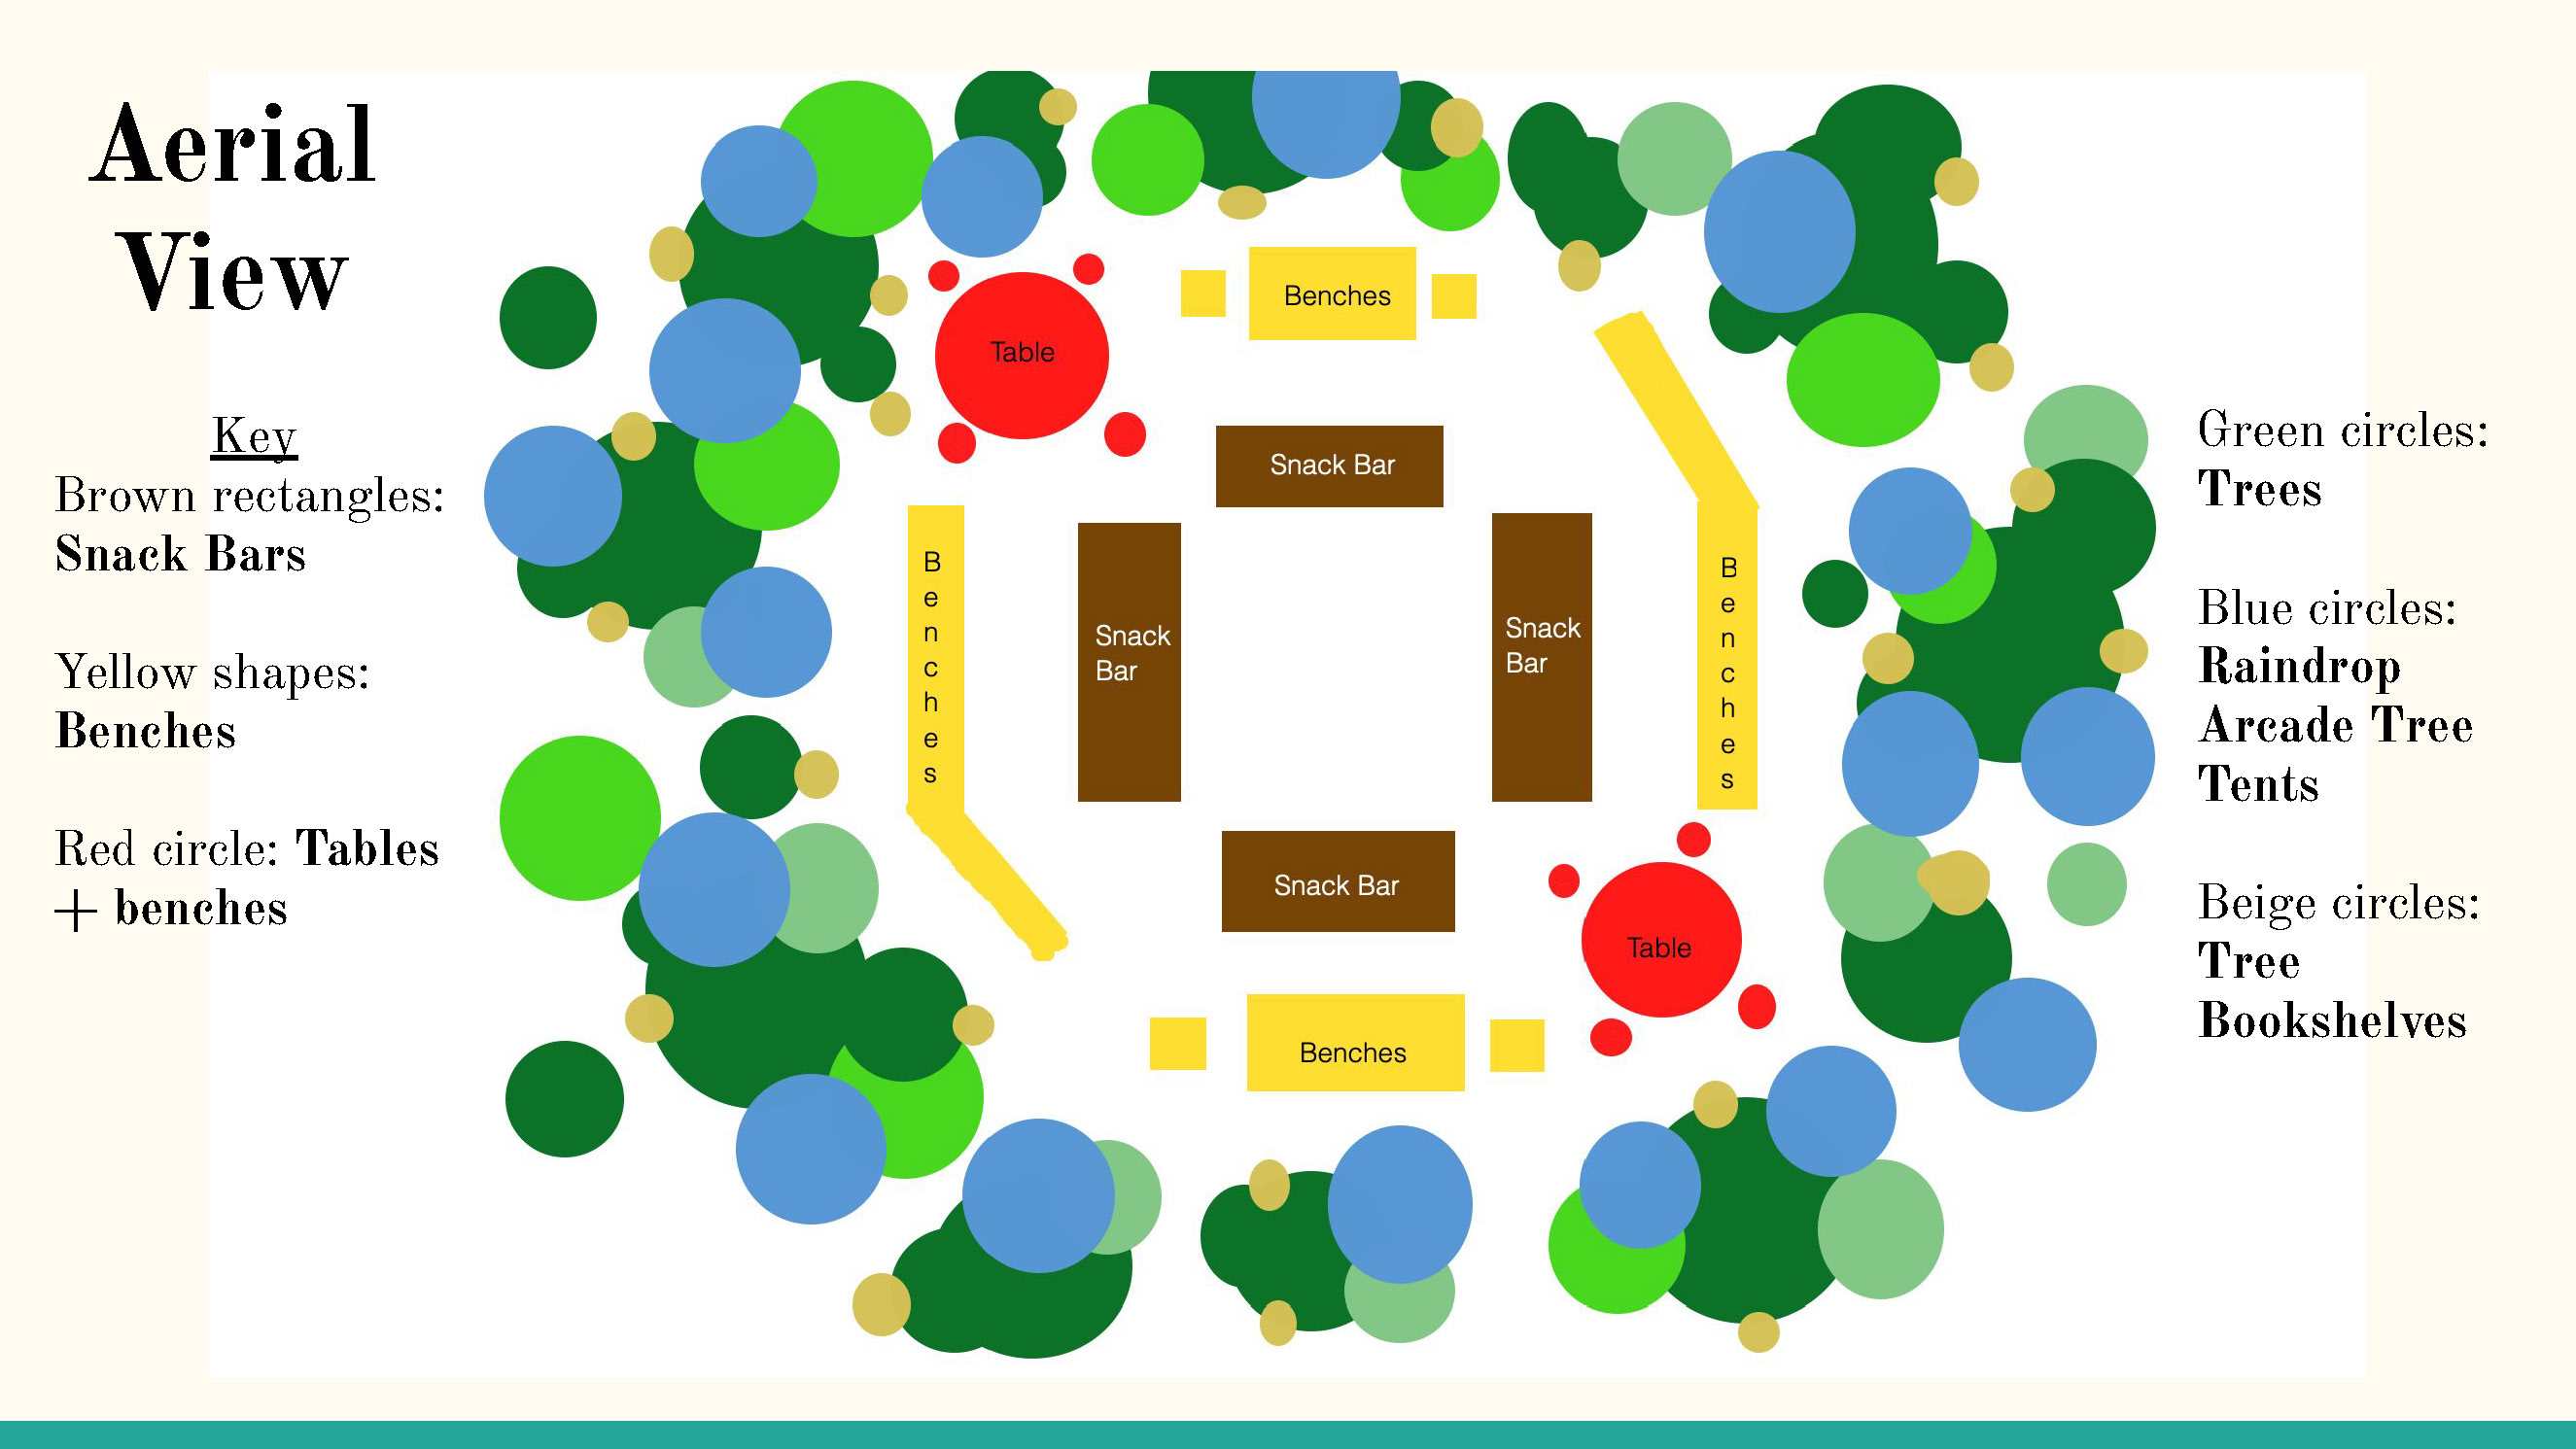 an aerial view for a nature center surrounded by green dots along the perimeter of a series of colored rectangles, the key shows that brown rectangles are snack bars, yellow shapes are benches, red circles are tables and benches, green circles are trees, blue circles are raindrop arcade tree tents, and beige circles are tree bookshelves